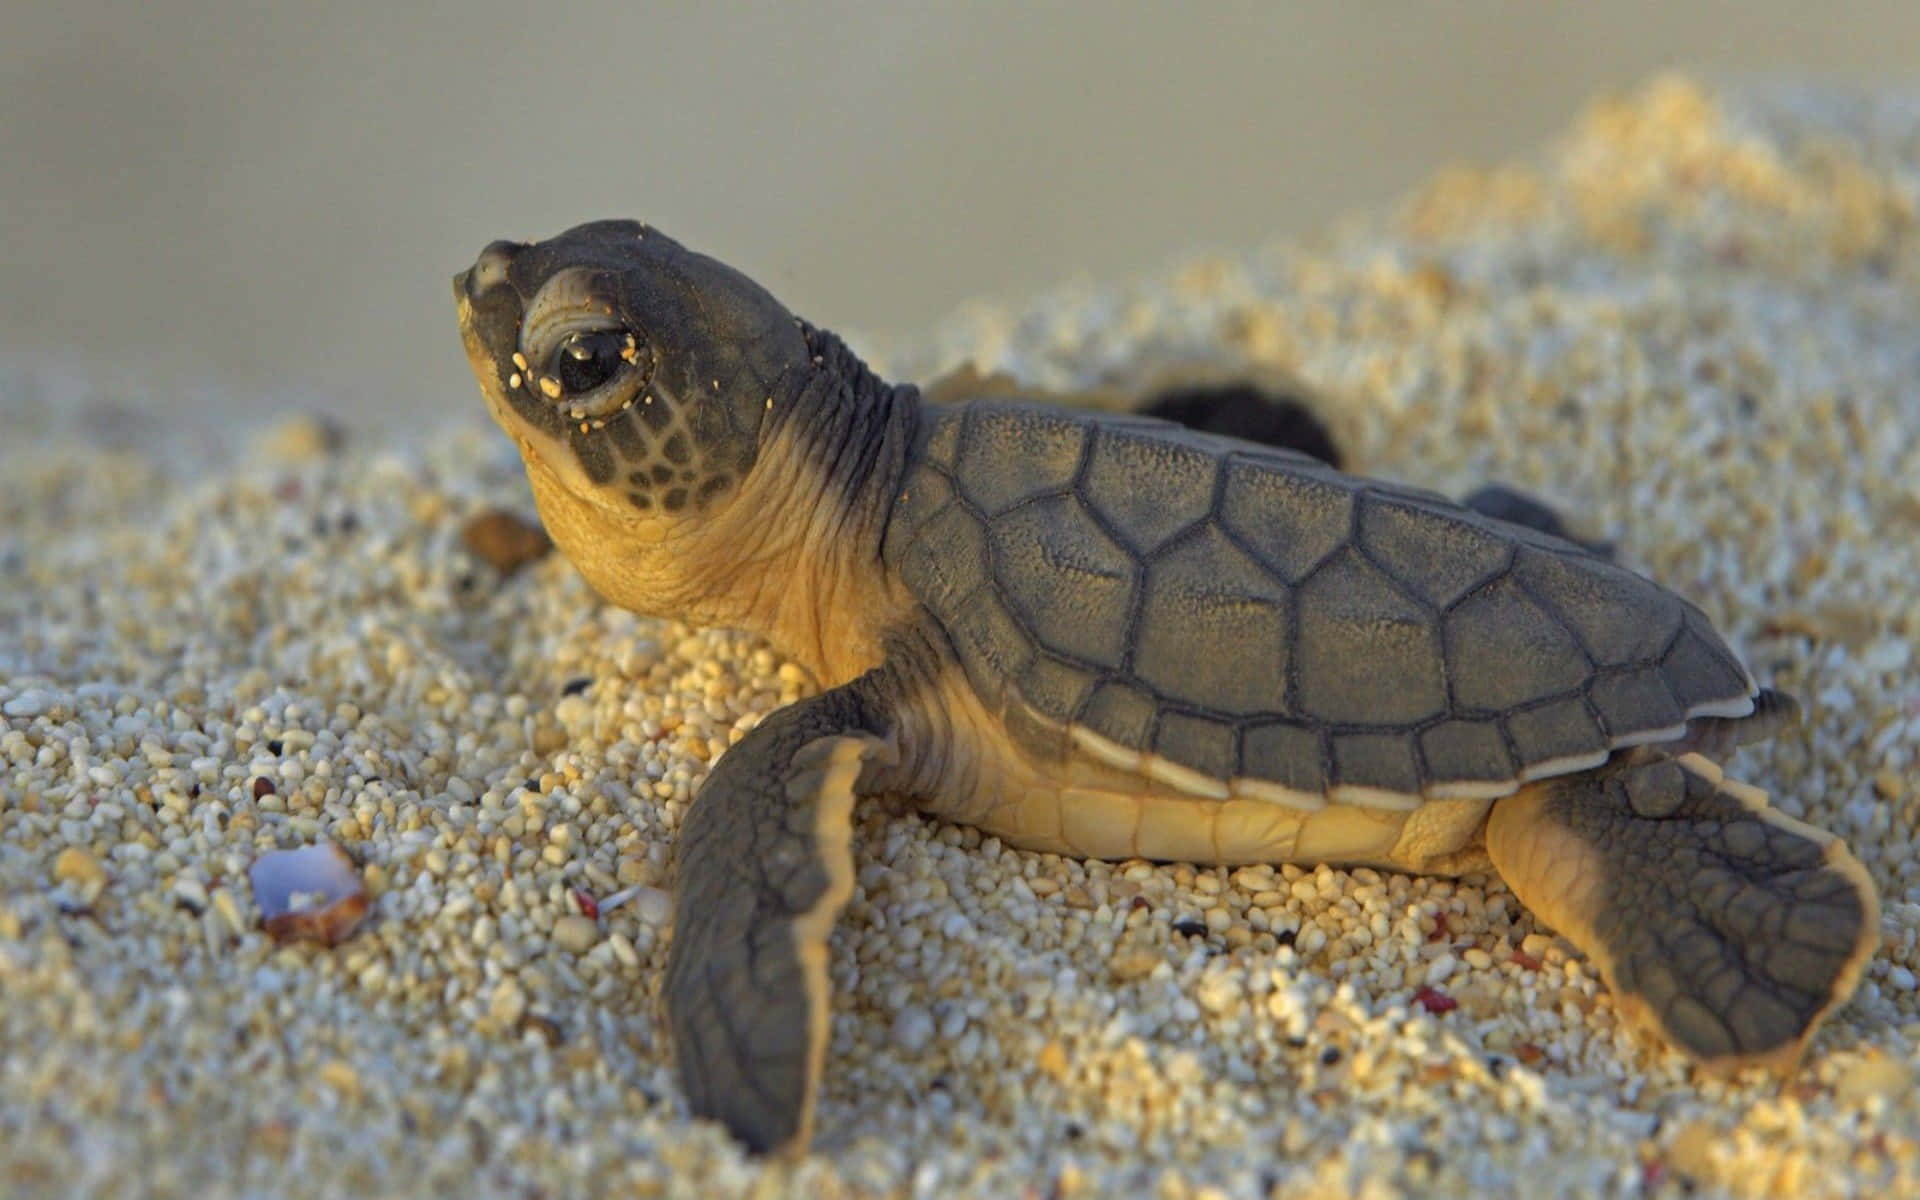 Cute Little Turtle Enjoying a Day at the Beach